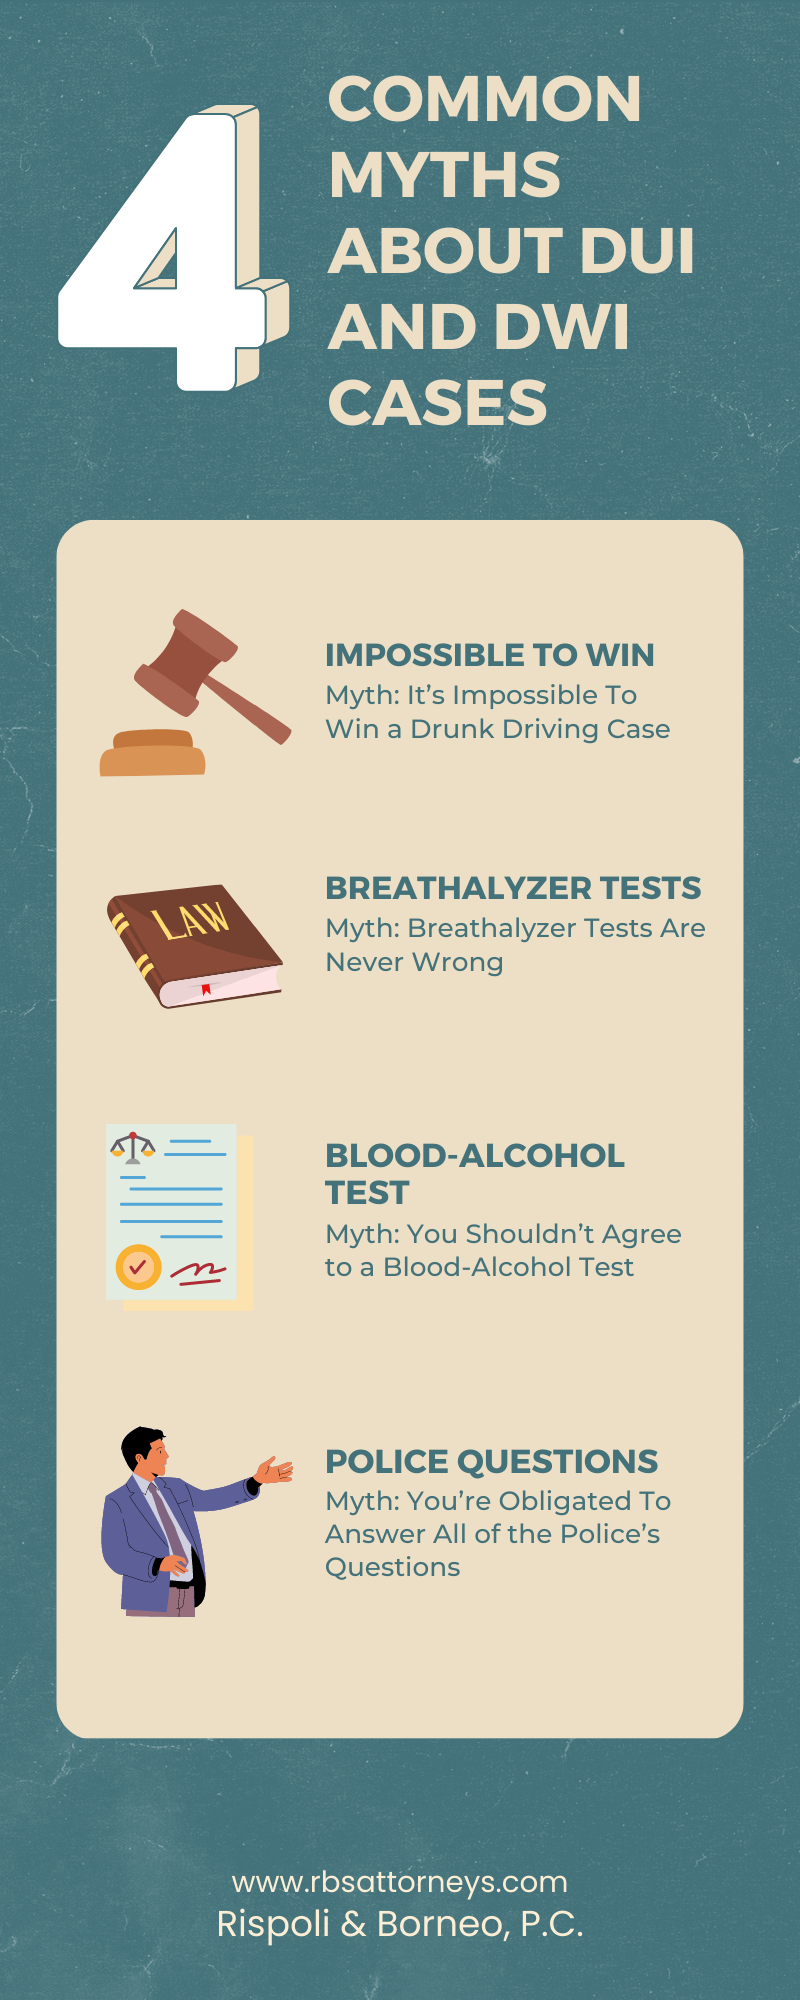 Common Myths About DUI and DWI Cases Infographic